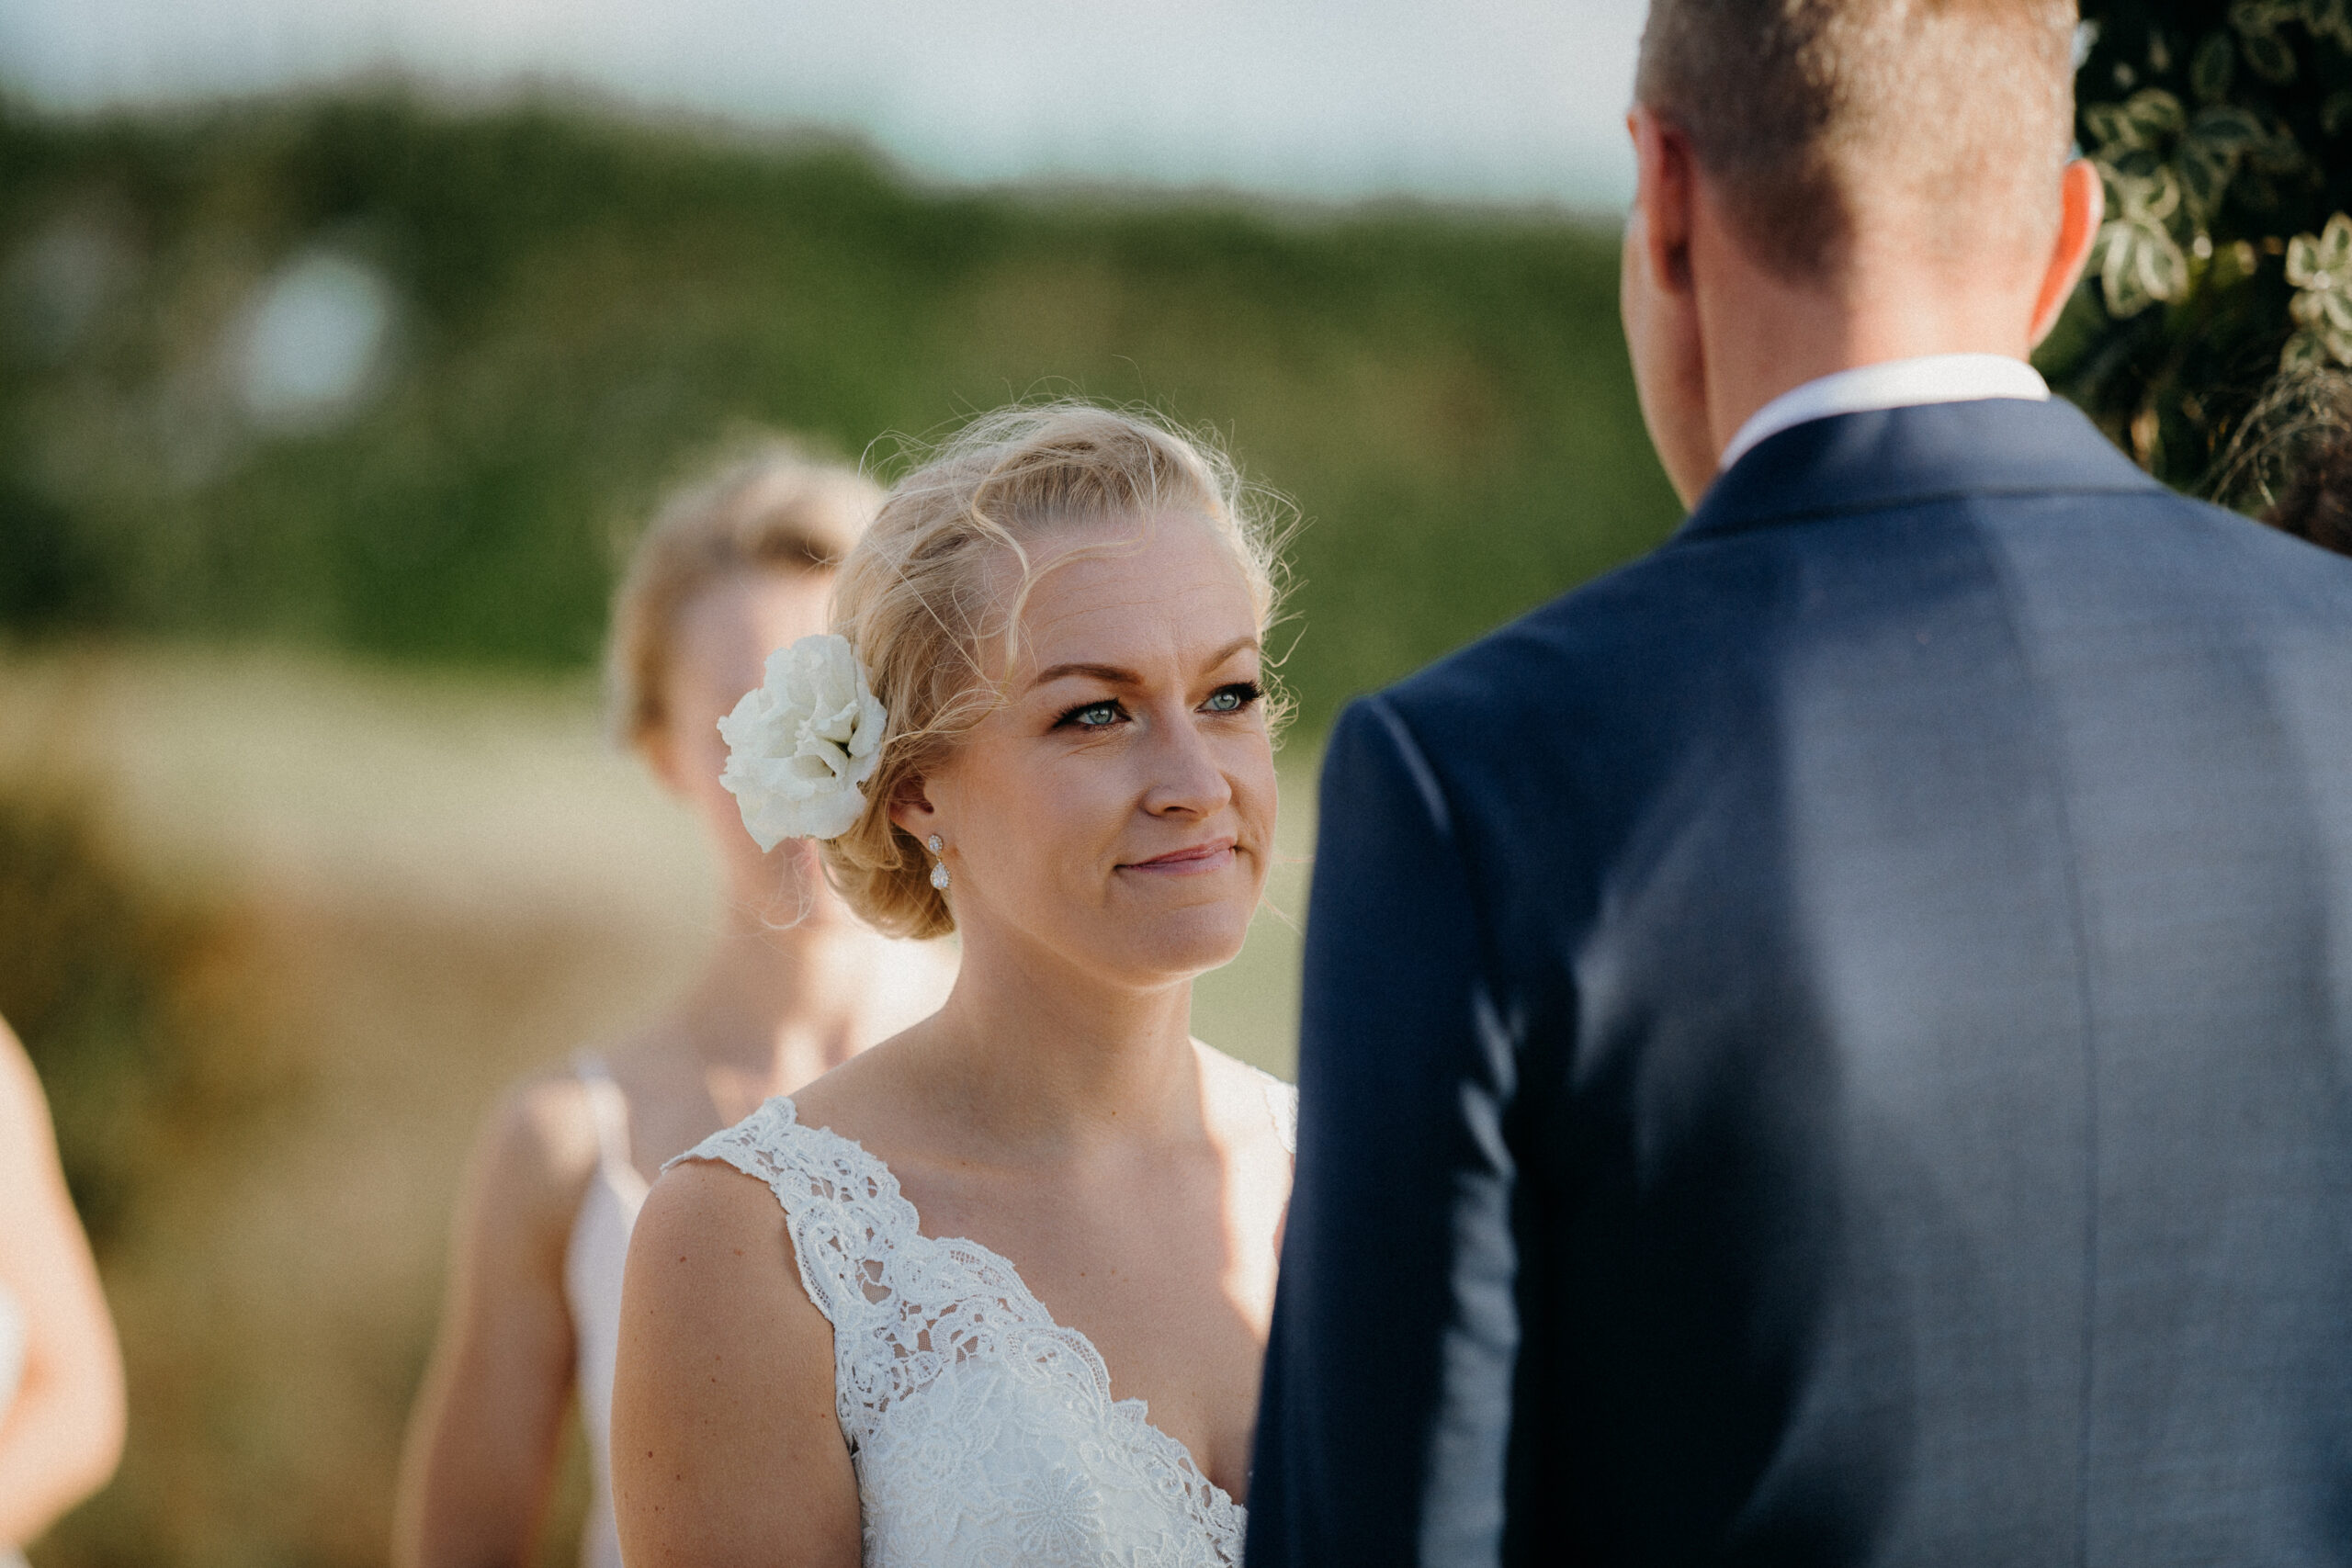 Bride looking at groom during wedding ceremony at Mudbrick Lodge on Waiheke Island Auckland, photo by Sarah Weber Photography